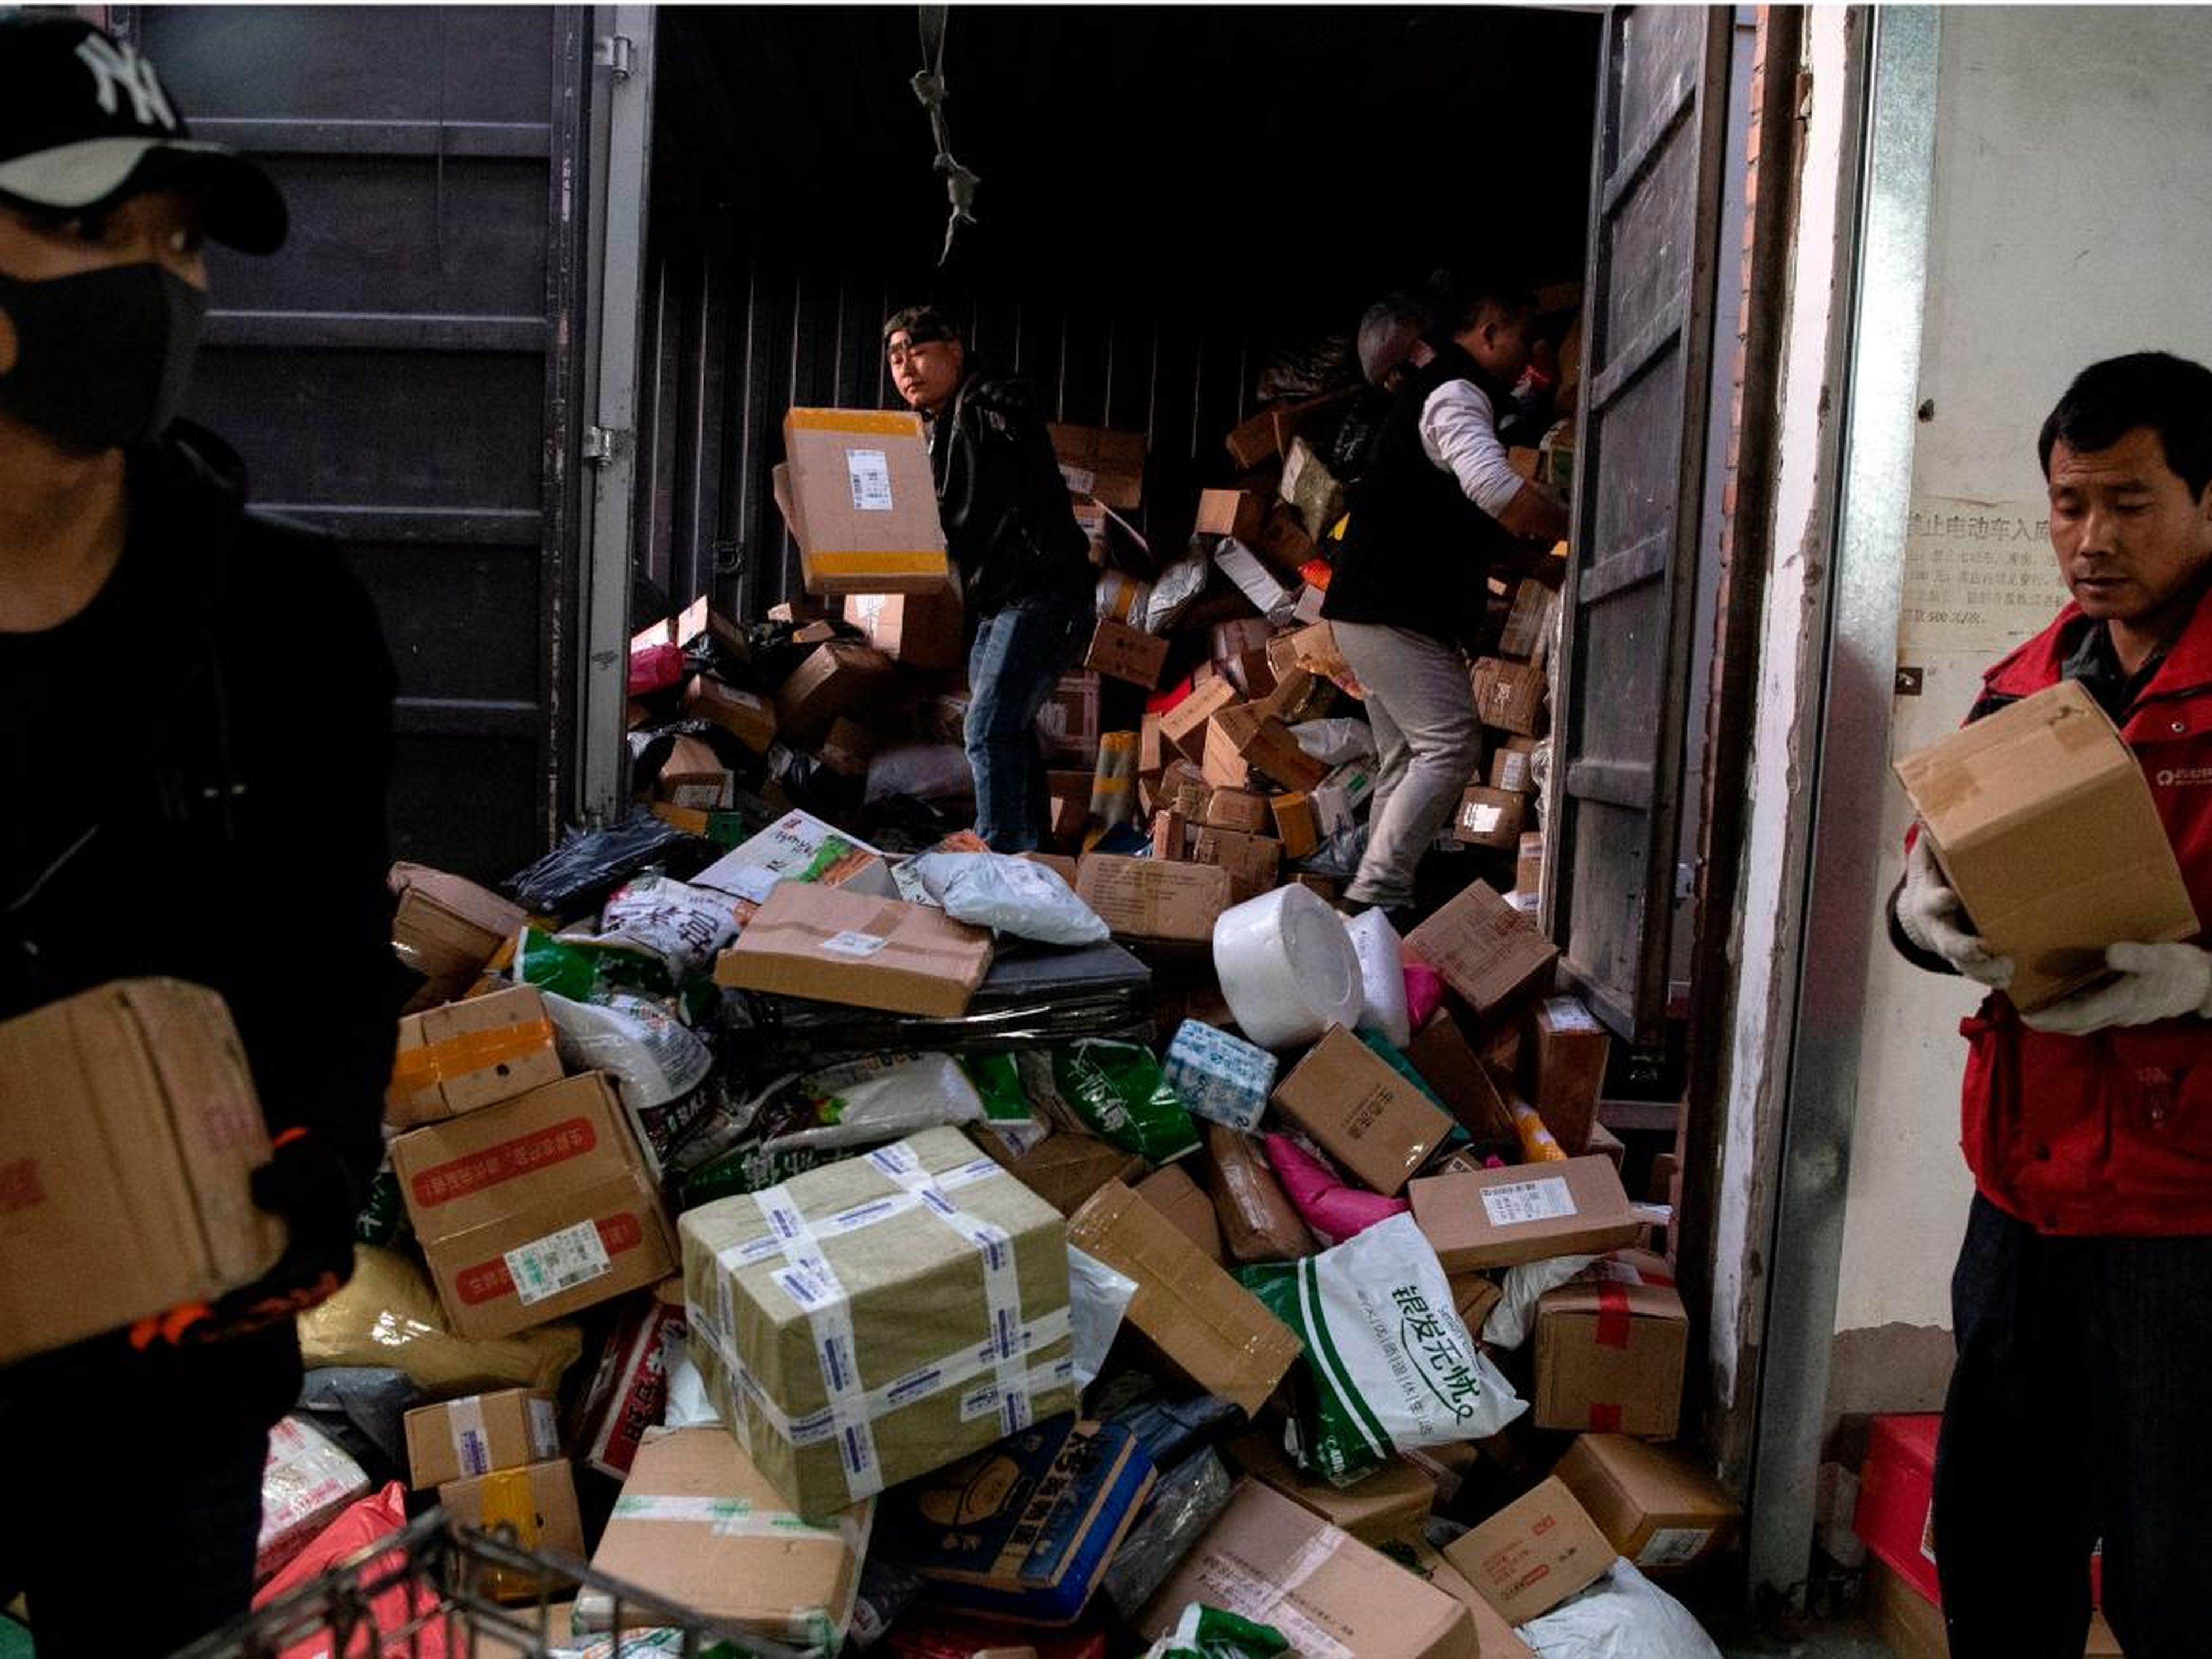 Photos show Singles Day packages piling up in warehouses in Beijing, China, and some warehouses look more crowded than others.